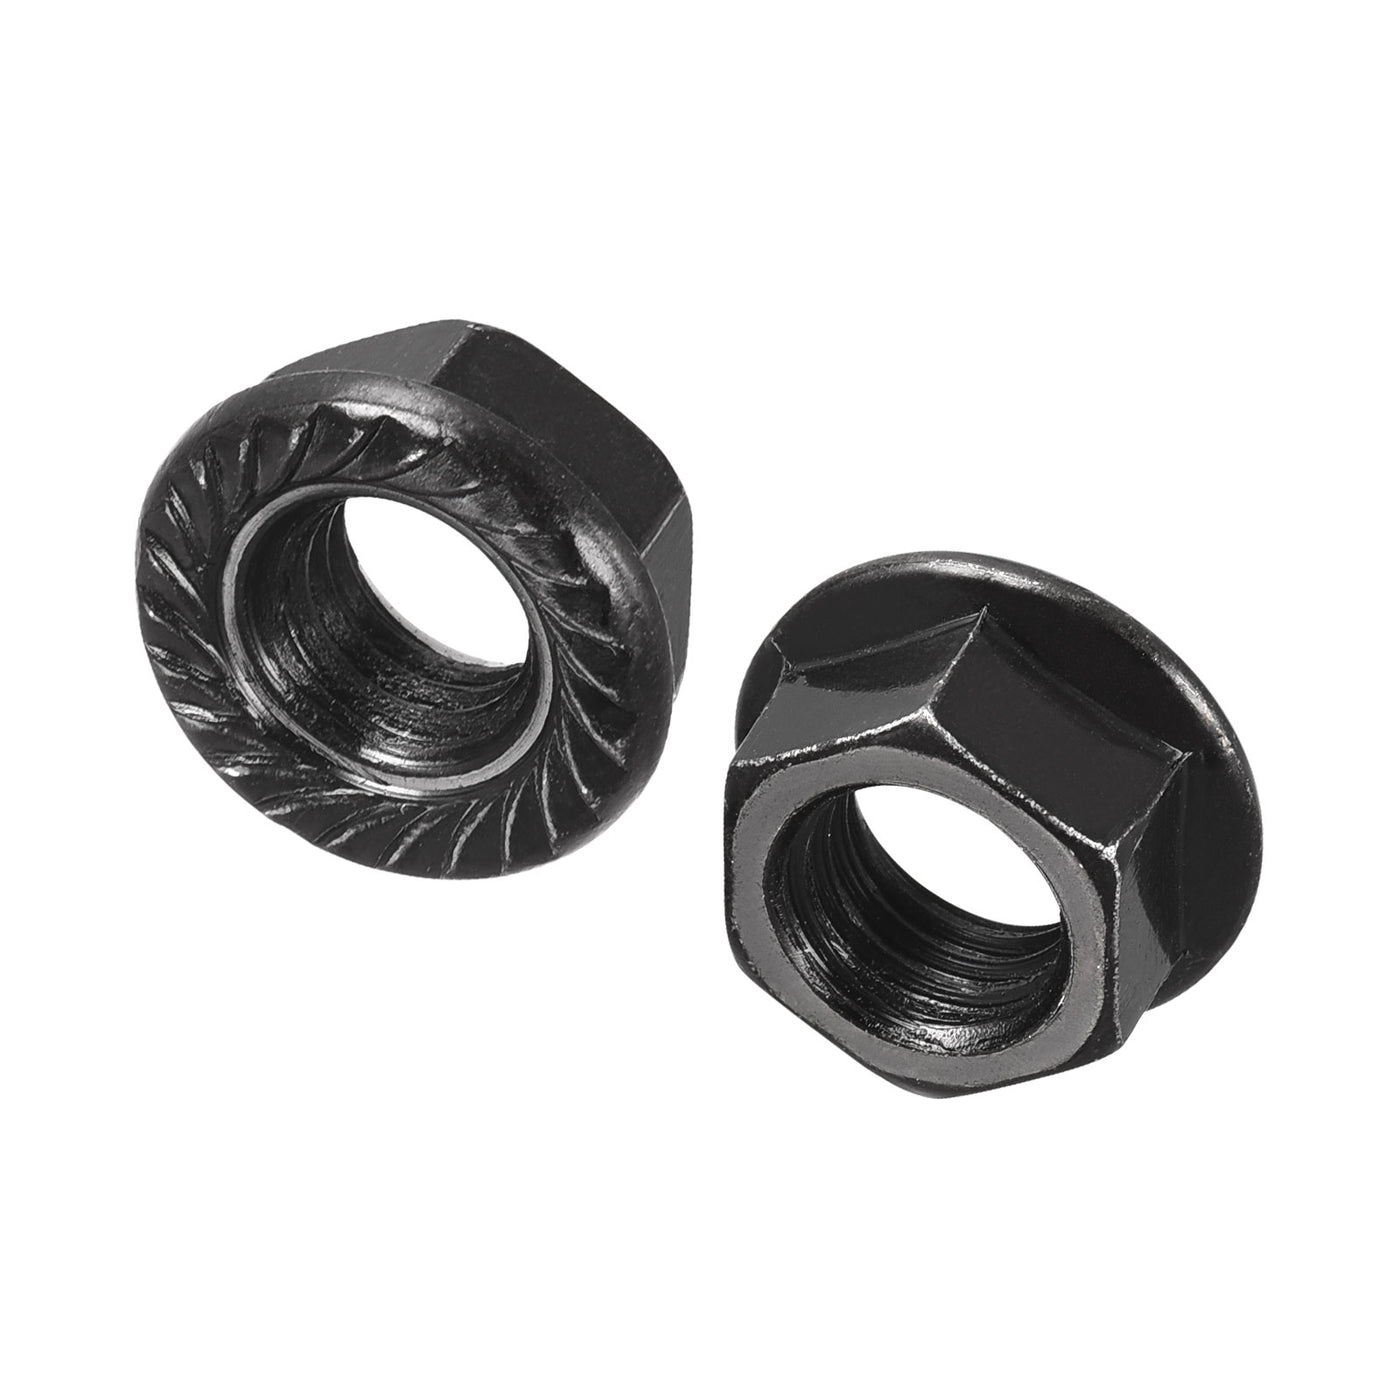 Uxcell Uxcell 20pcs M6 Serrated Flange Hex Lock Nuts Carbon Steel Black Oxide Finished